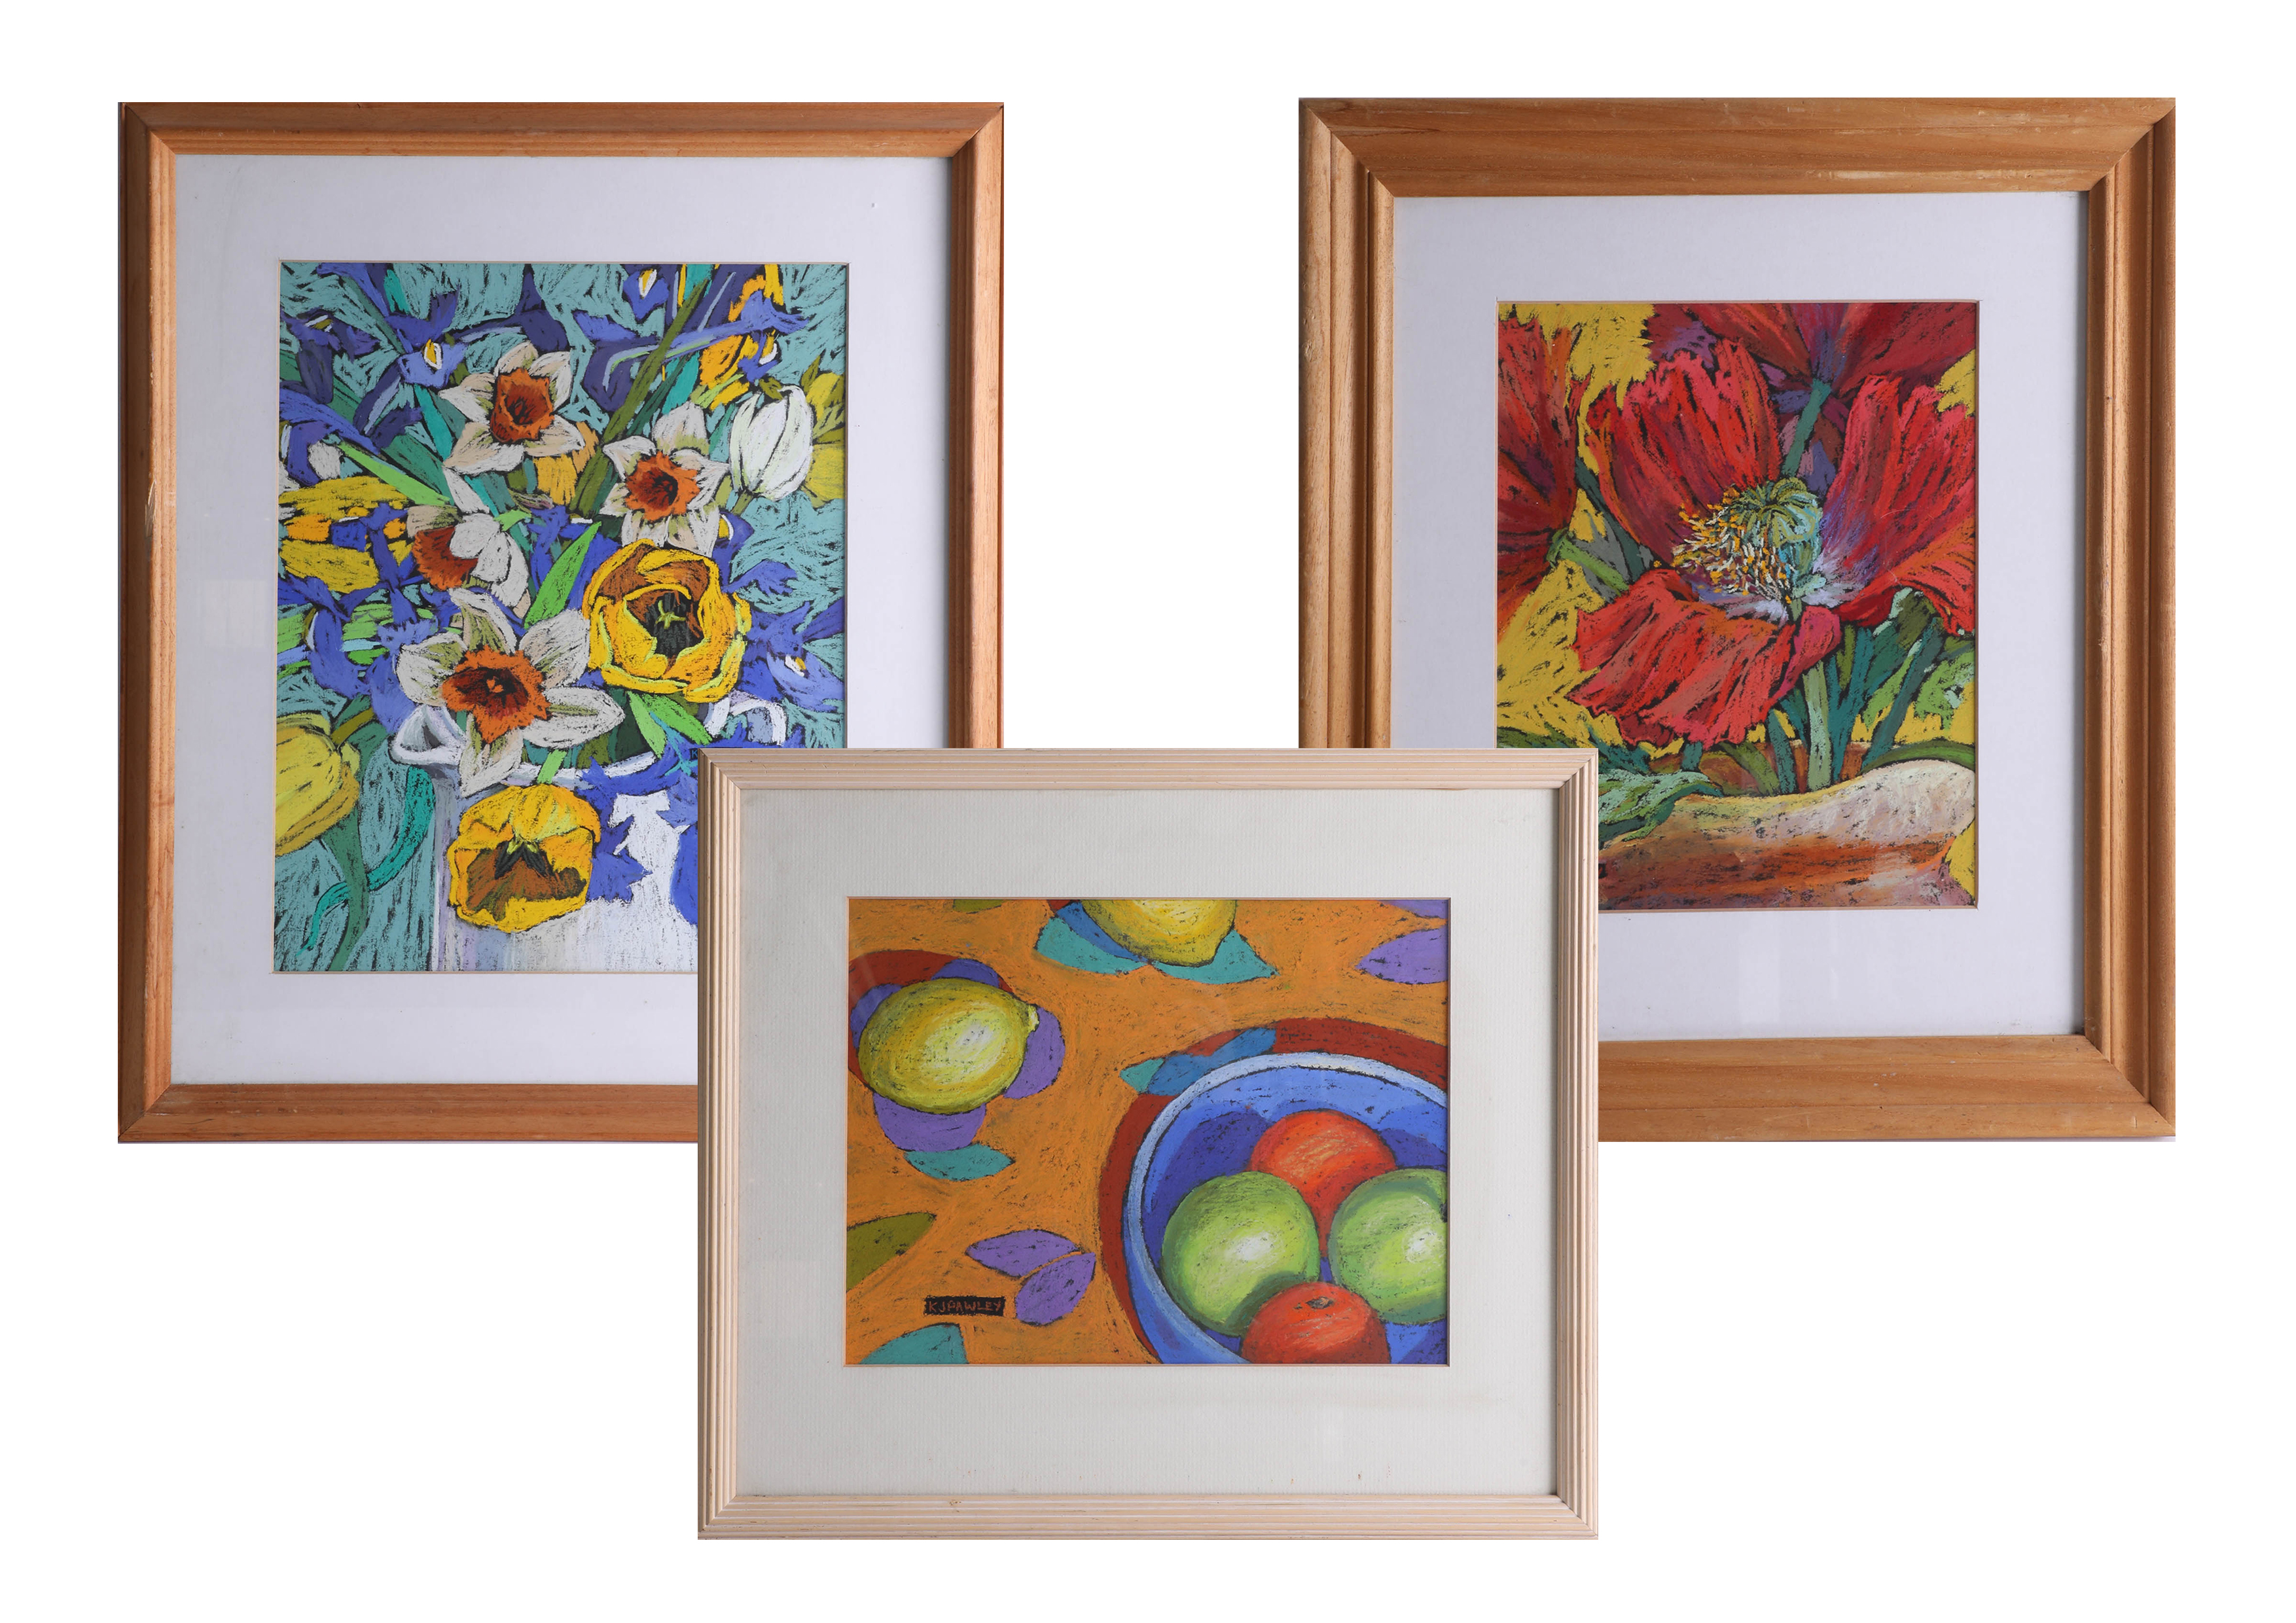 Three Karen J Pawley pastels of Flowers and Still Life, largest 45cm x 37cm (3).